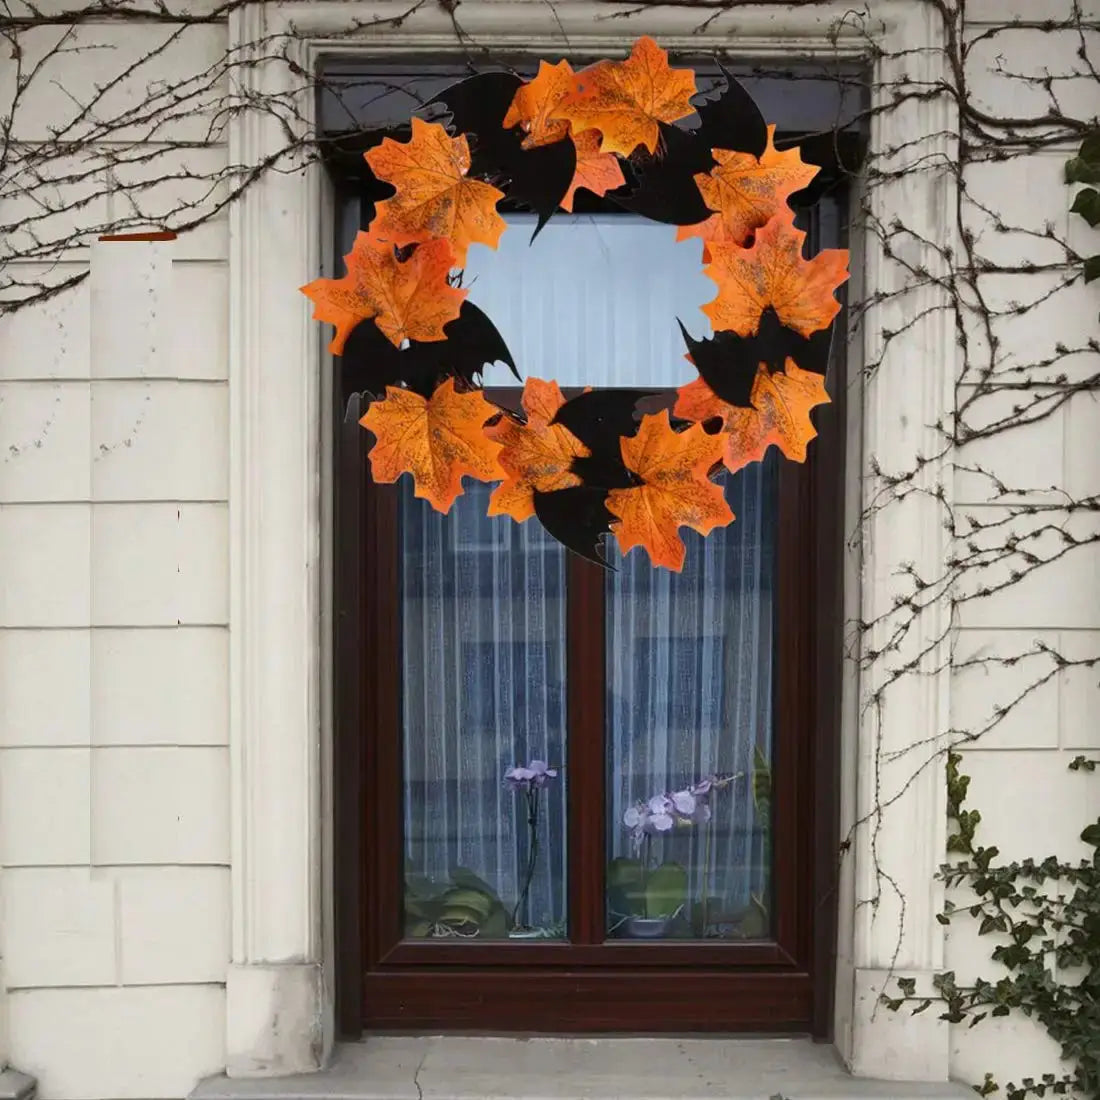 a wreath with orange leaves hanging from a window